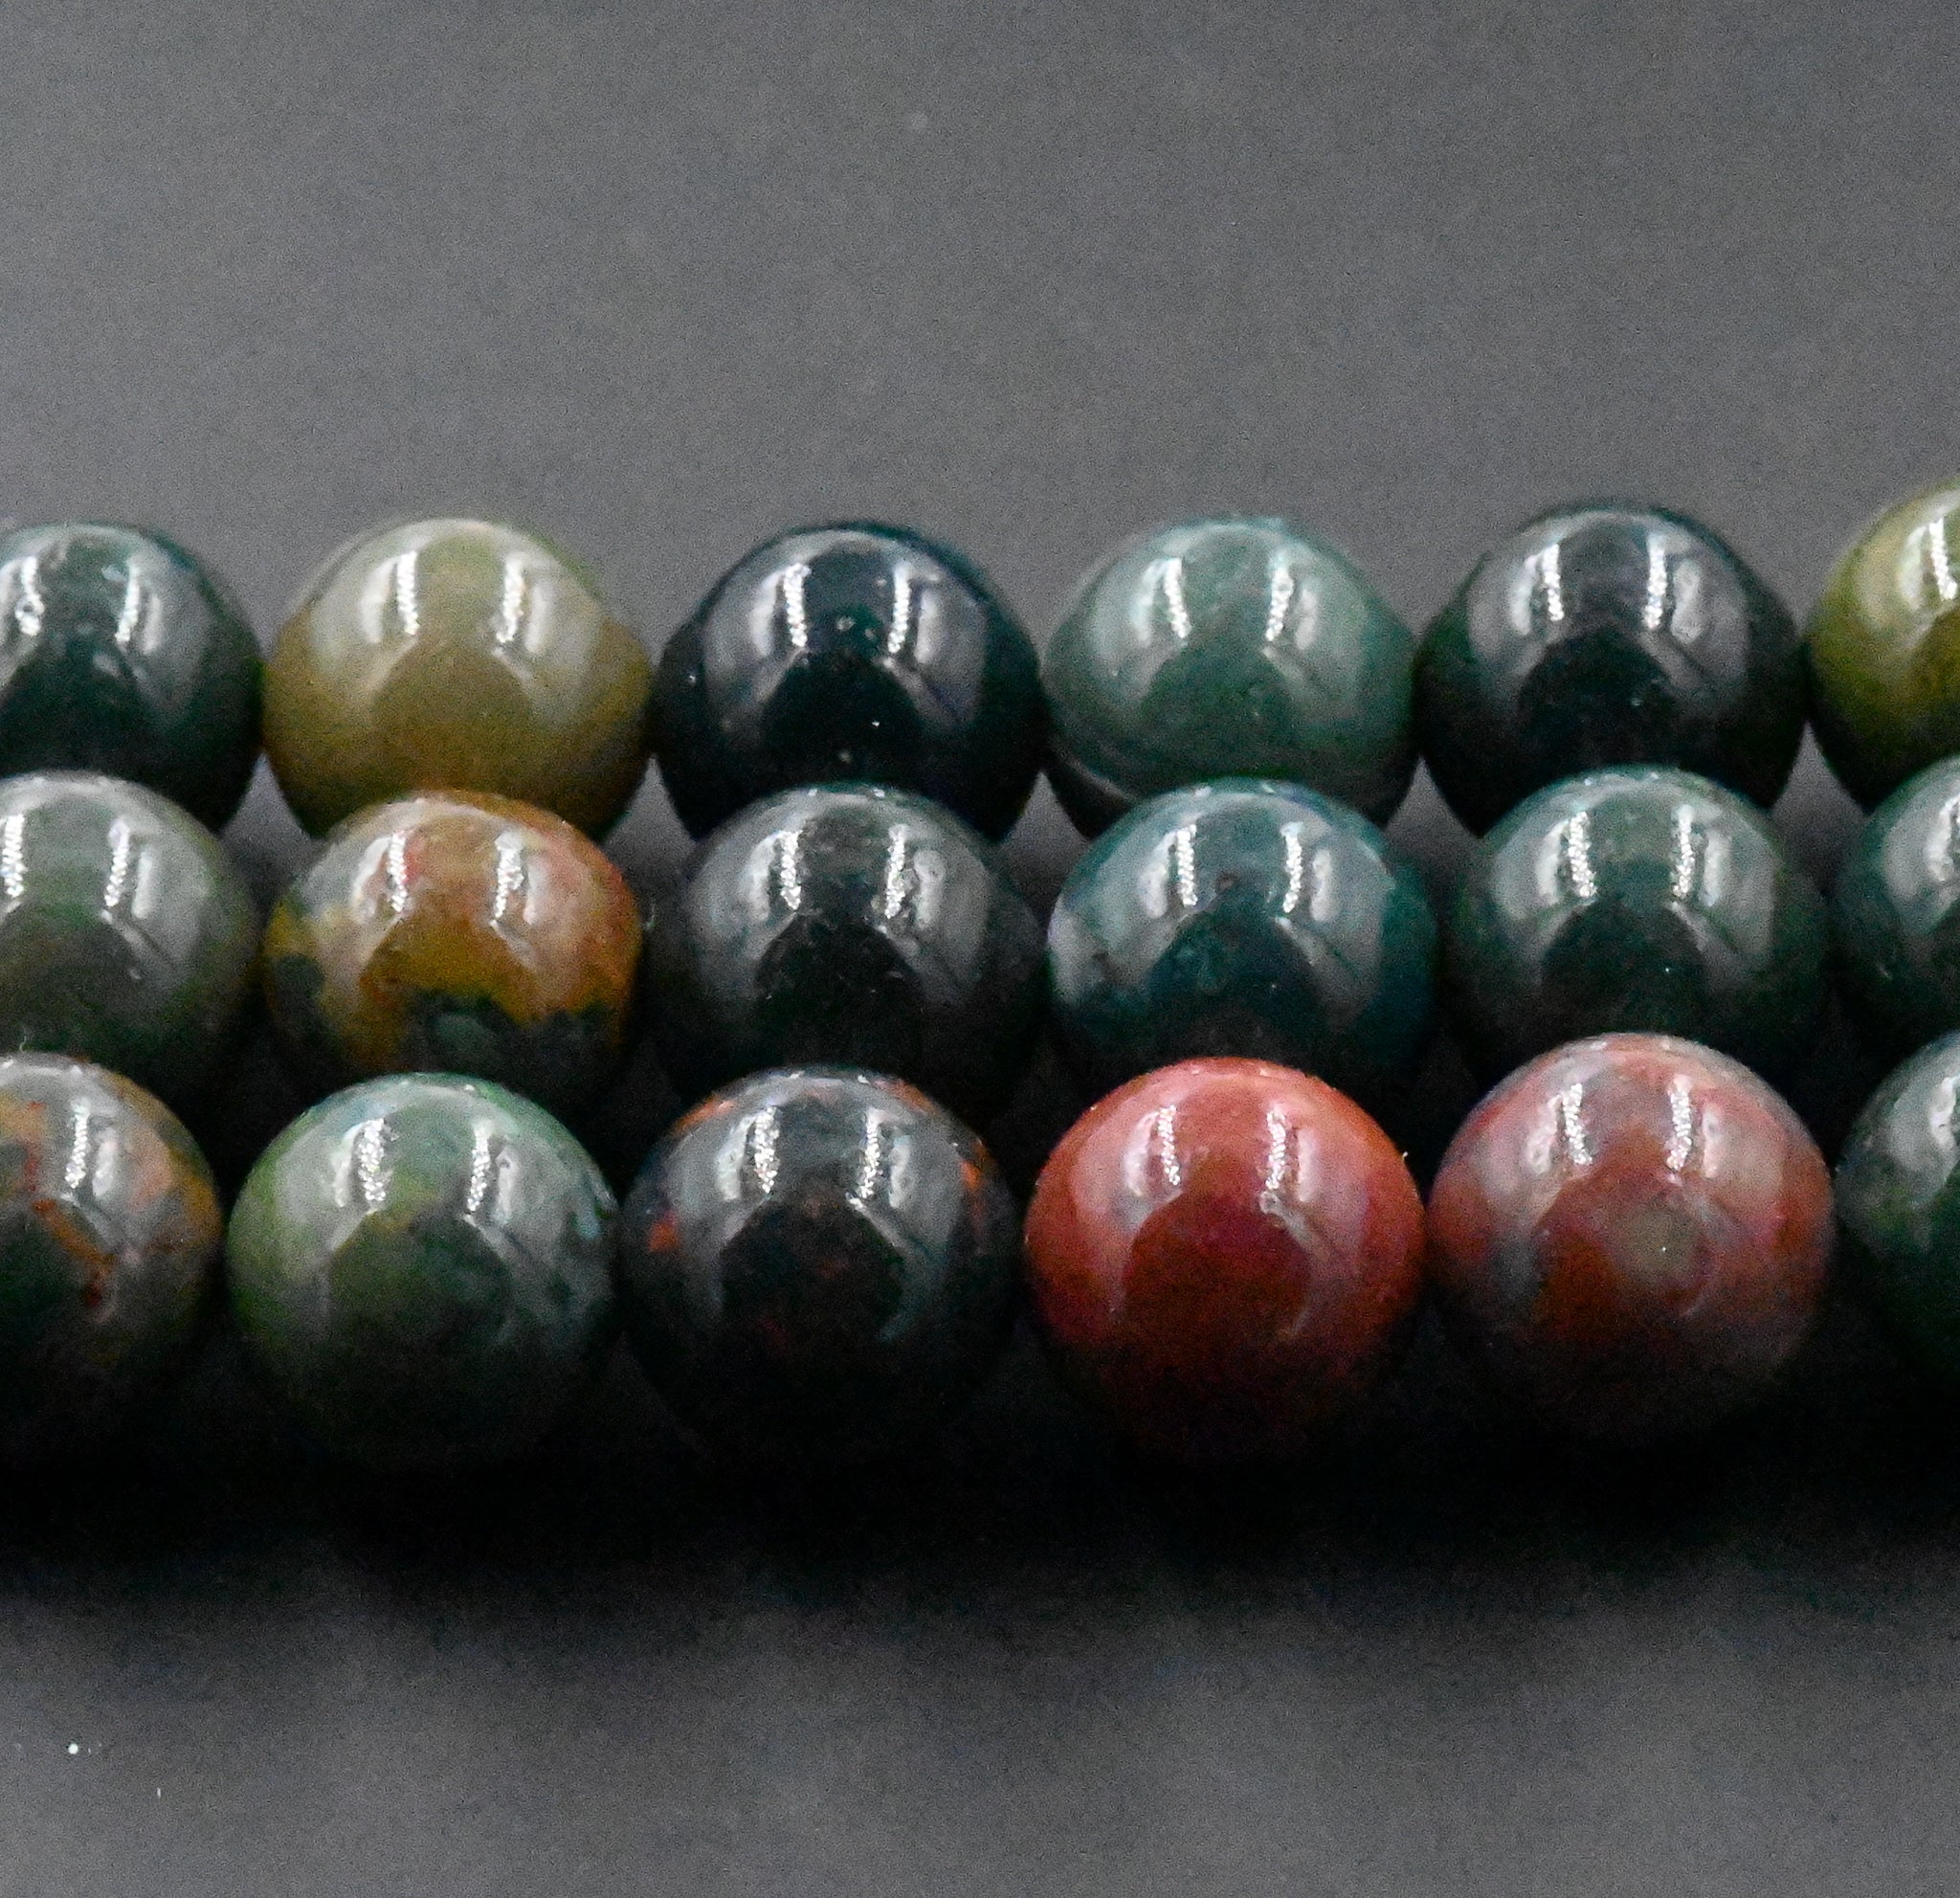 Blue Bloodstone Jasper 4mm, 6mm, 8mm, 10mm Round Beads in Deep Red and Blue Forrest Green